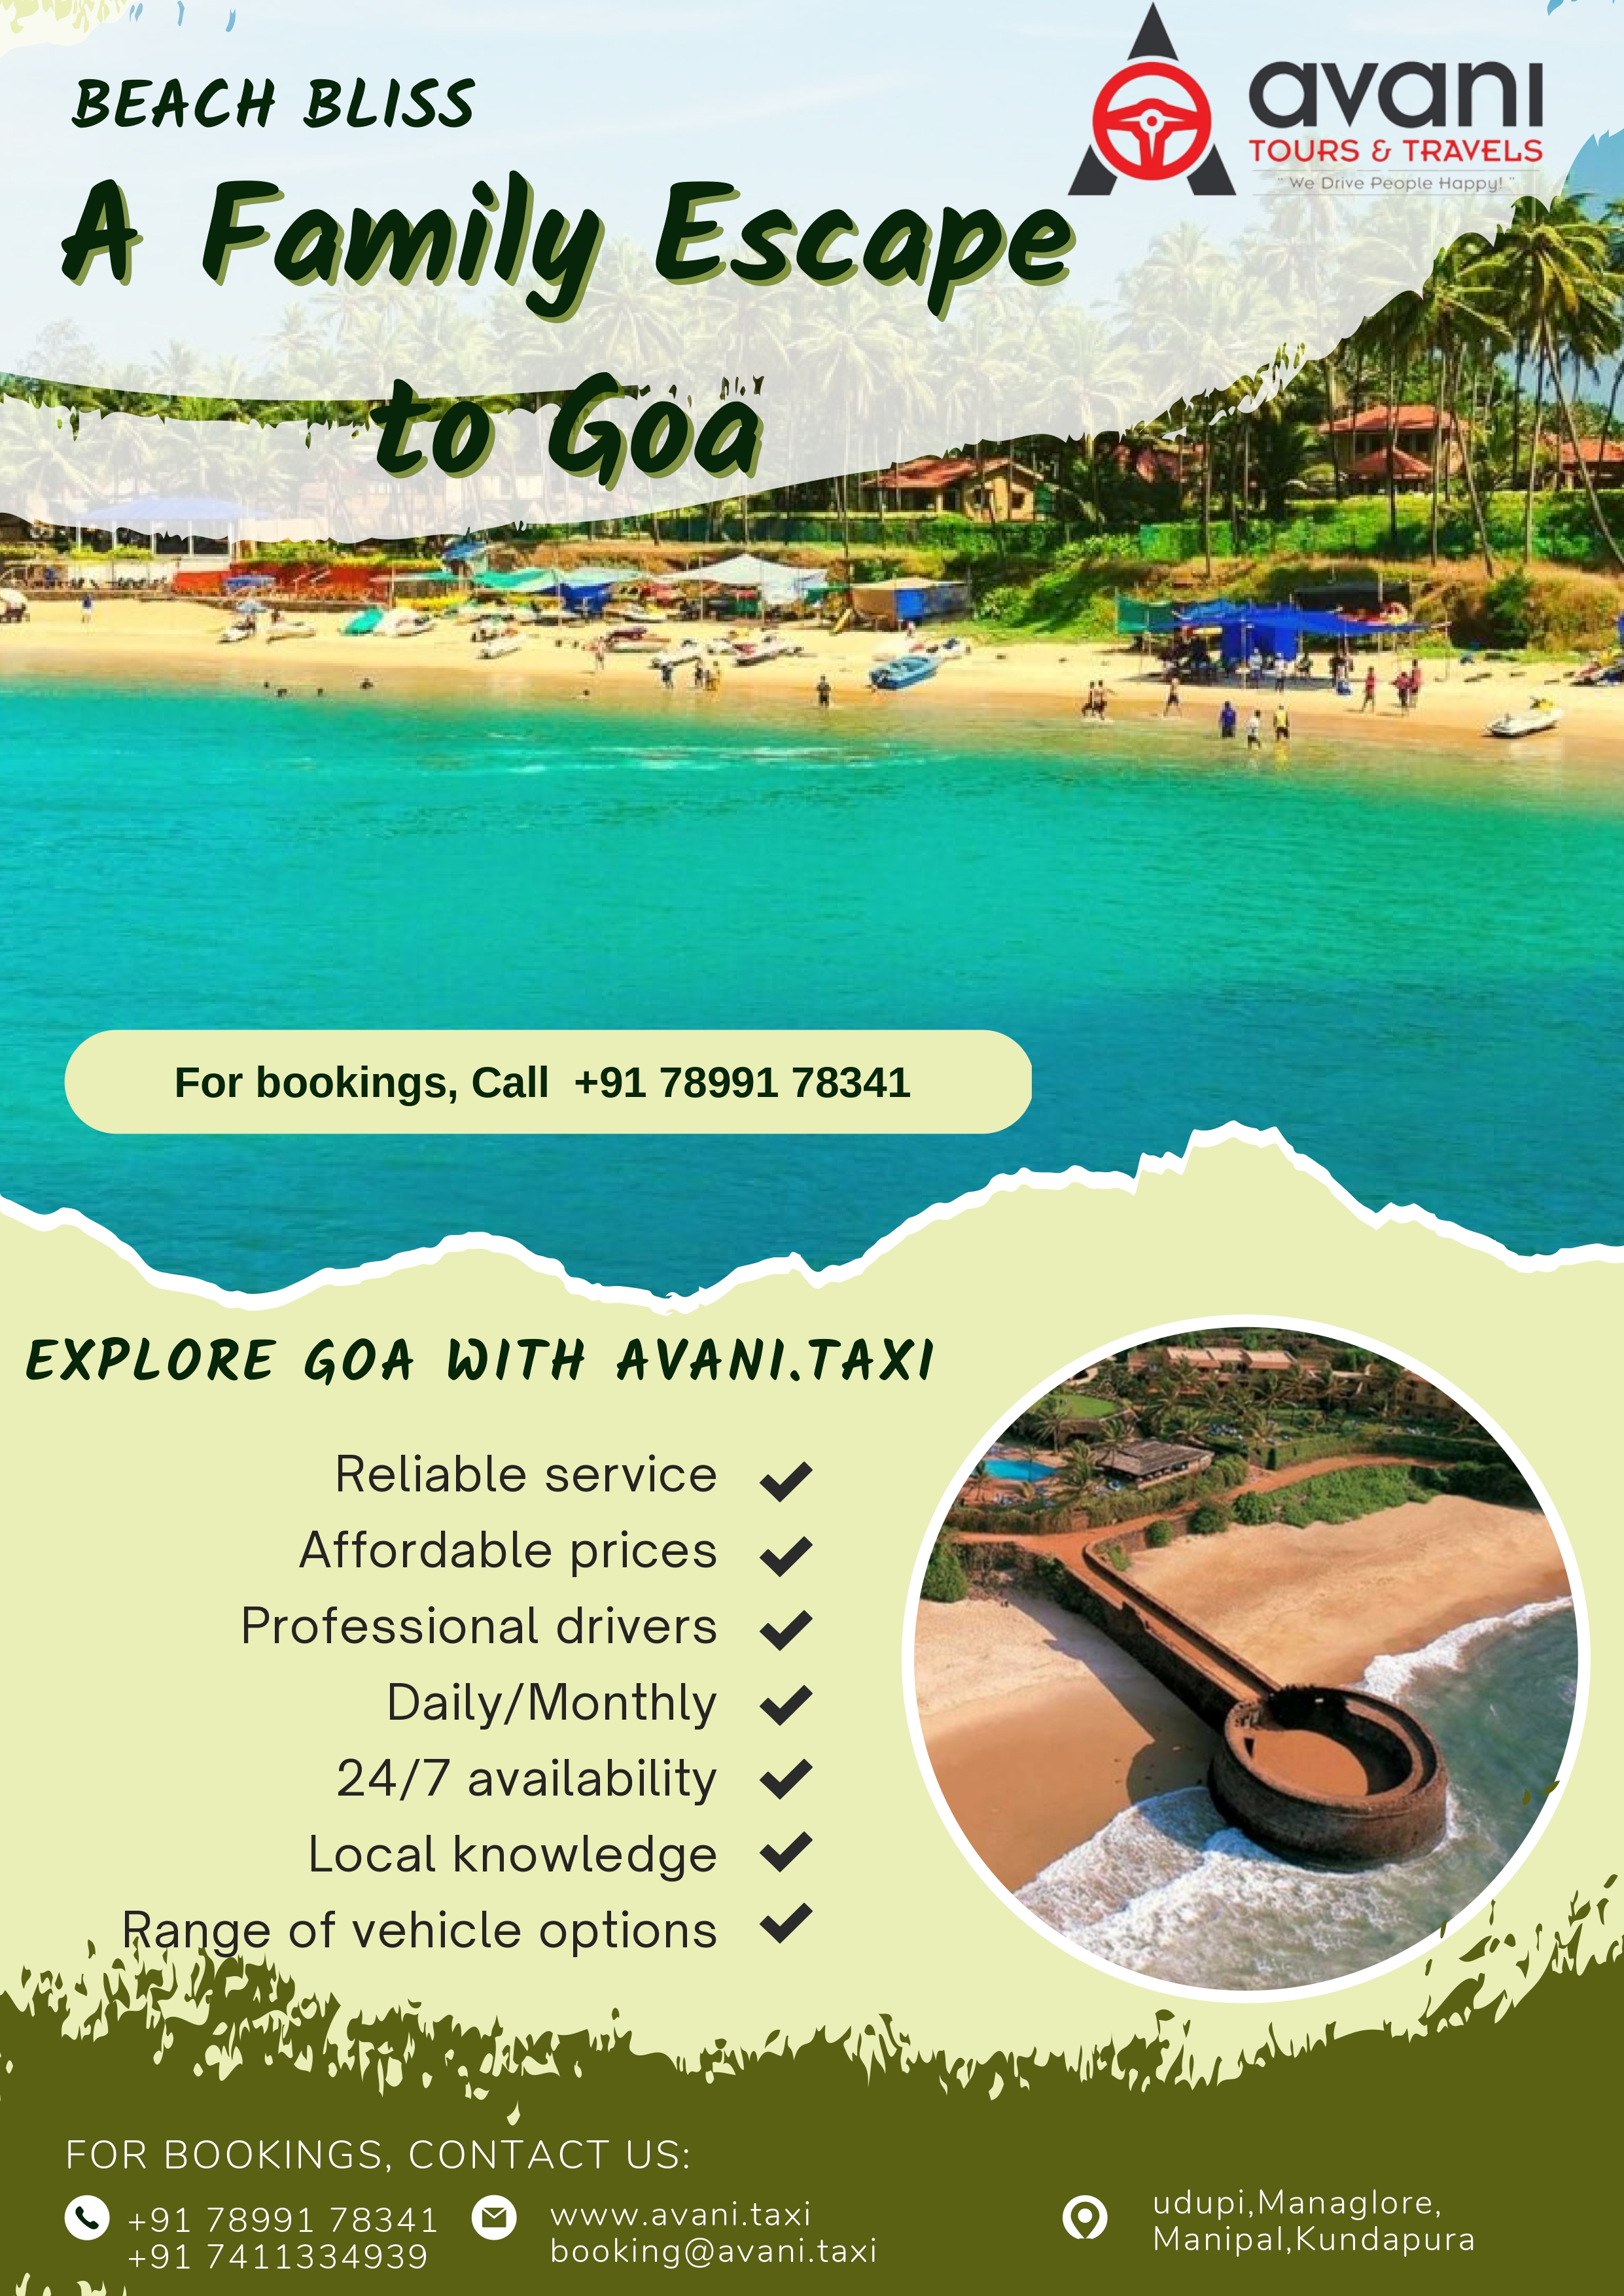 Experience the Magic of Goa with Avani Tours and Travels' Affordable Summer Packages